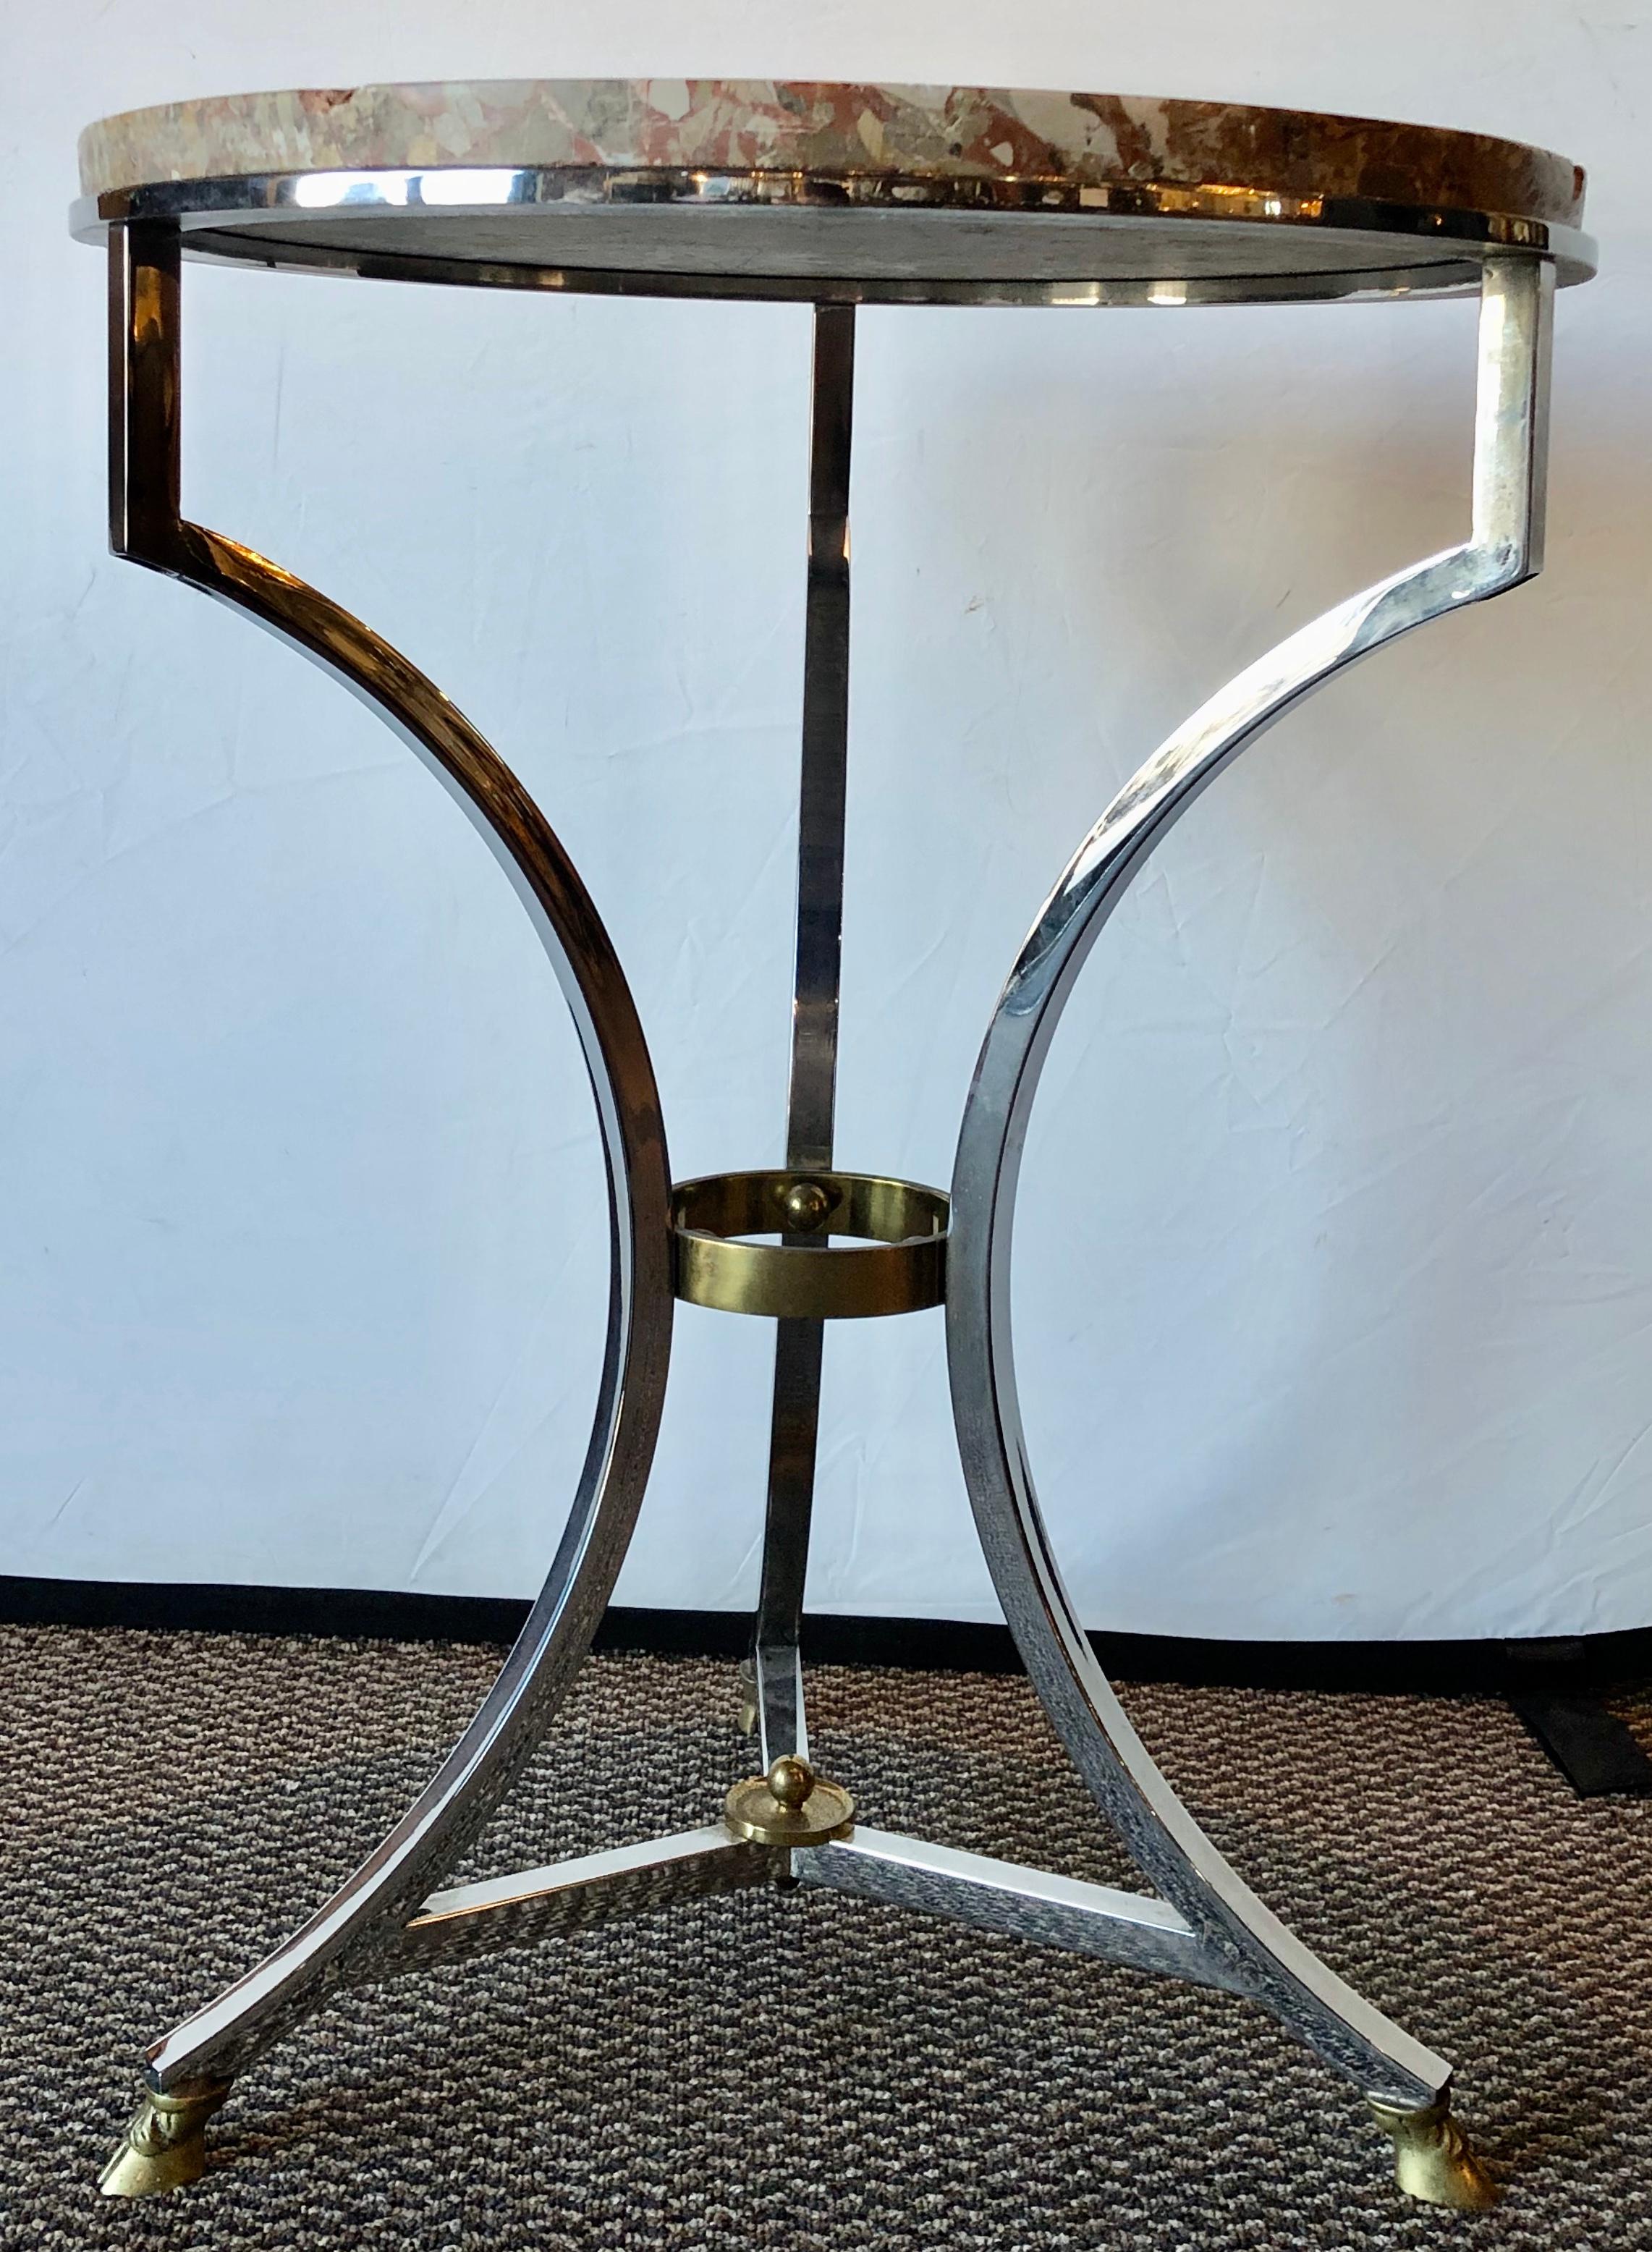 Steel and bronze Jansen Claw foot Bouilliotte or end table with a marble top. The finely detailed Hollywood Regency table having brass feet leading to a strong steel curved frame with a brass and steel cross bar. The base supporting a rouge gray and